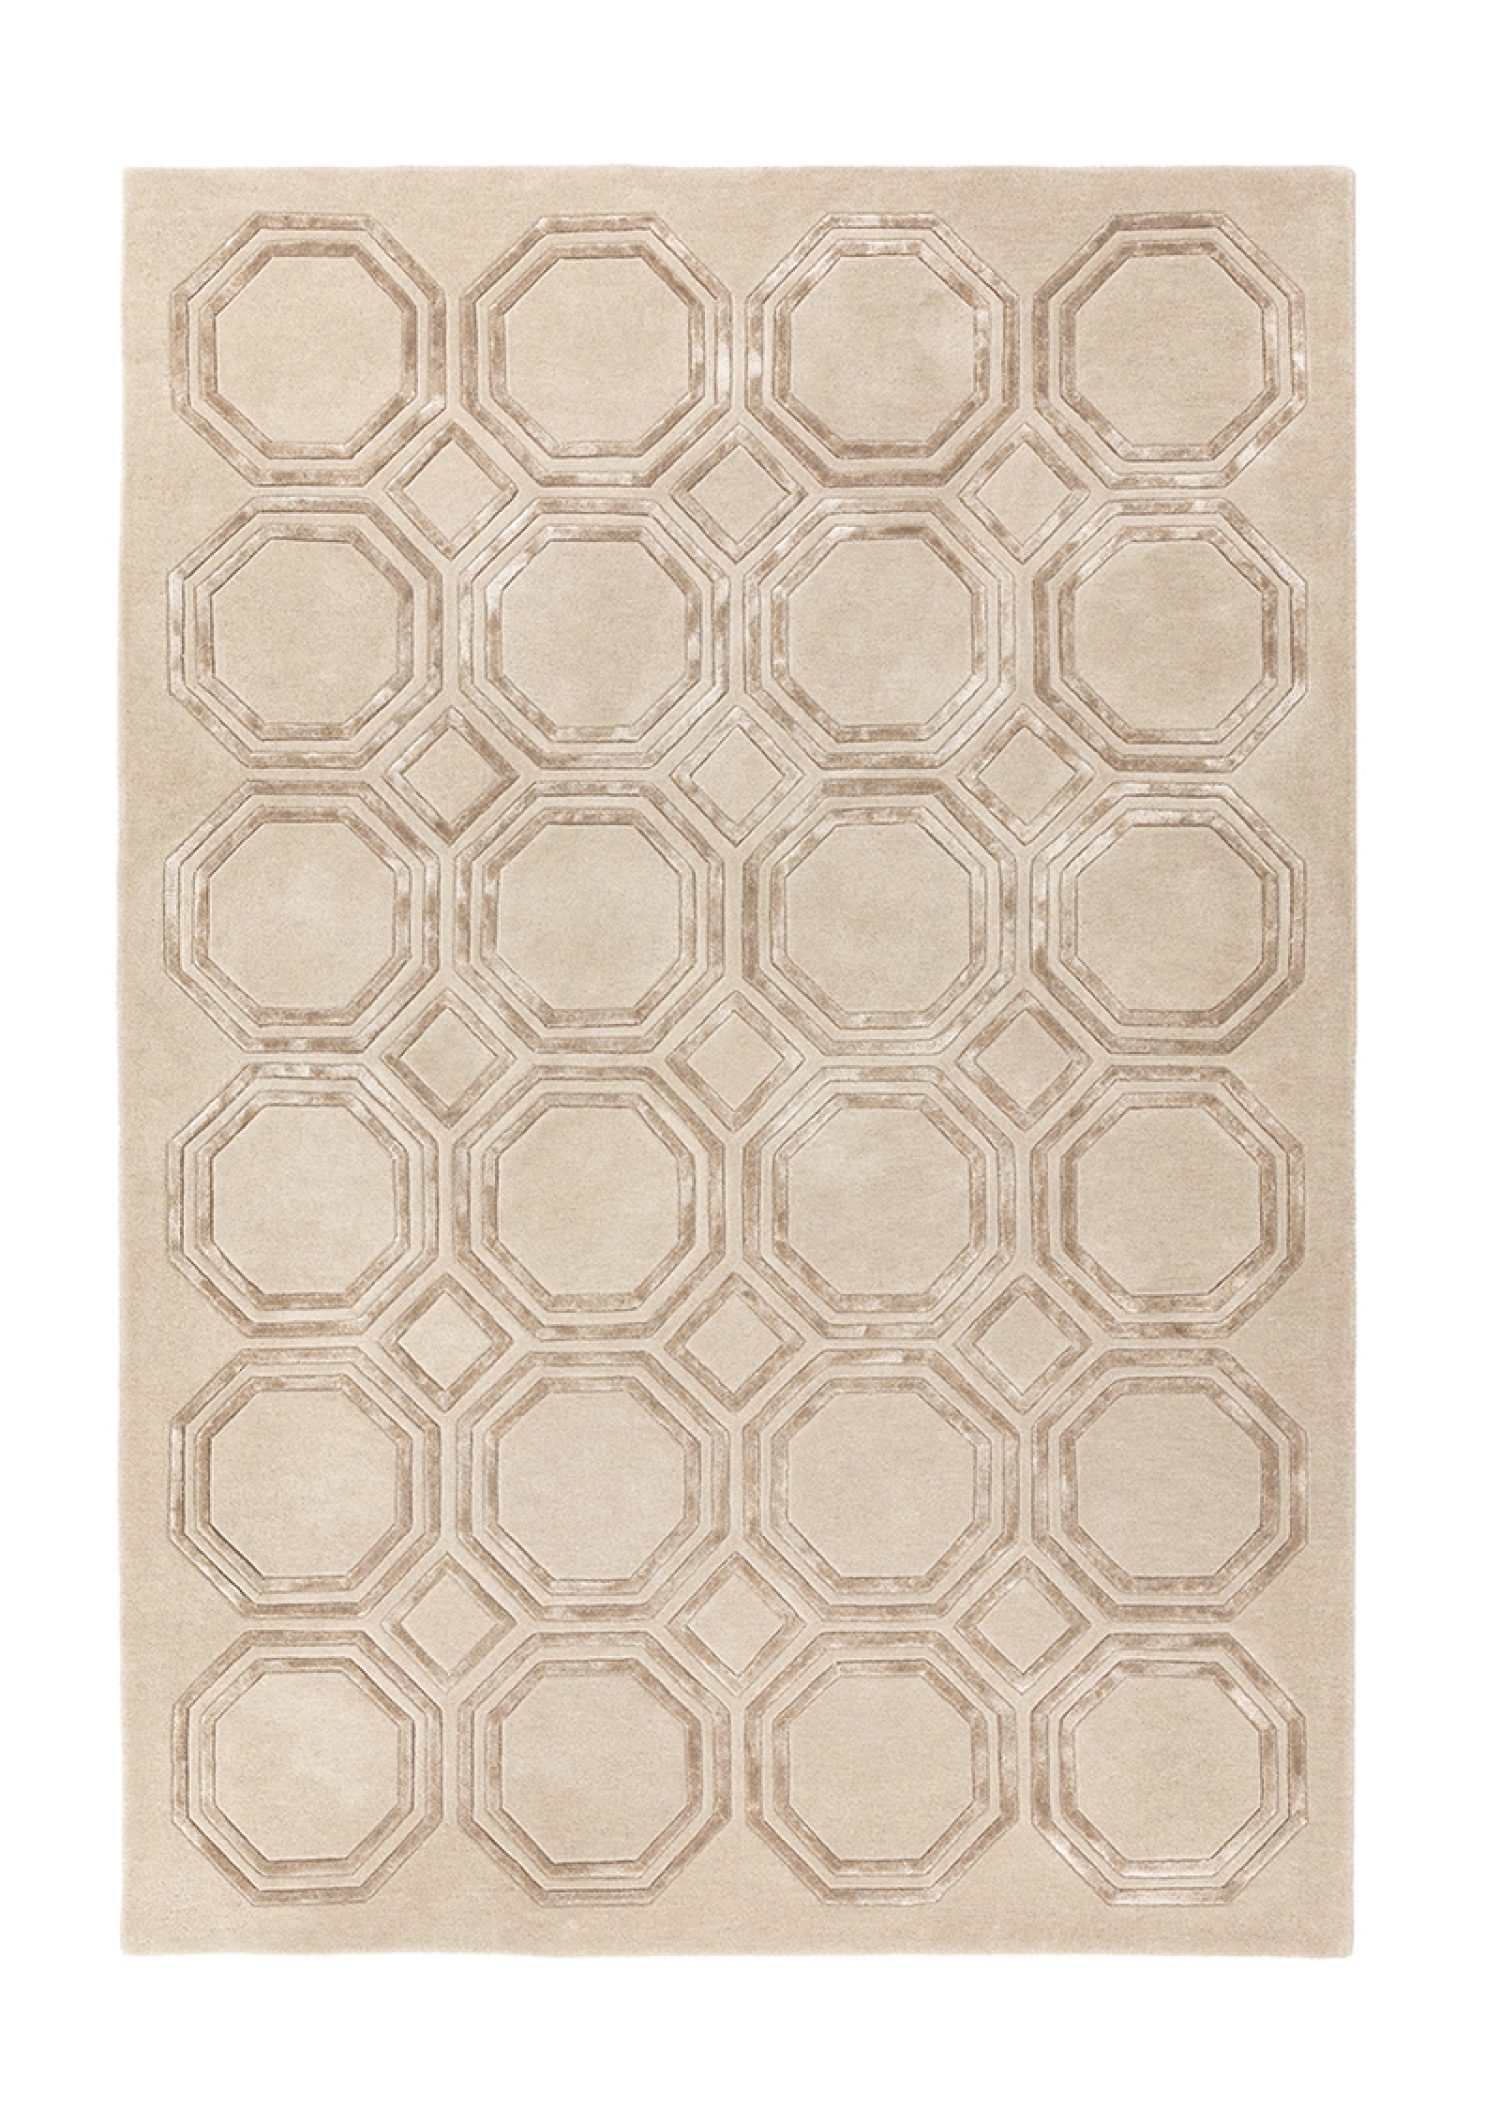 Prenium quality hand tufted rug in precise hand carved geometric designs